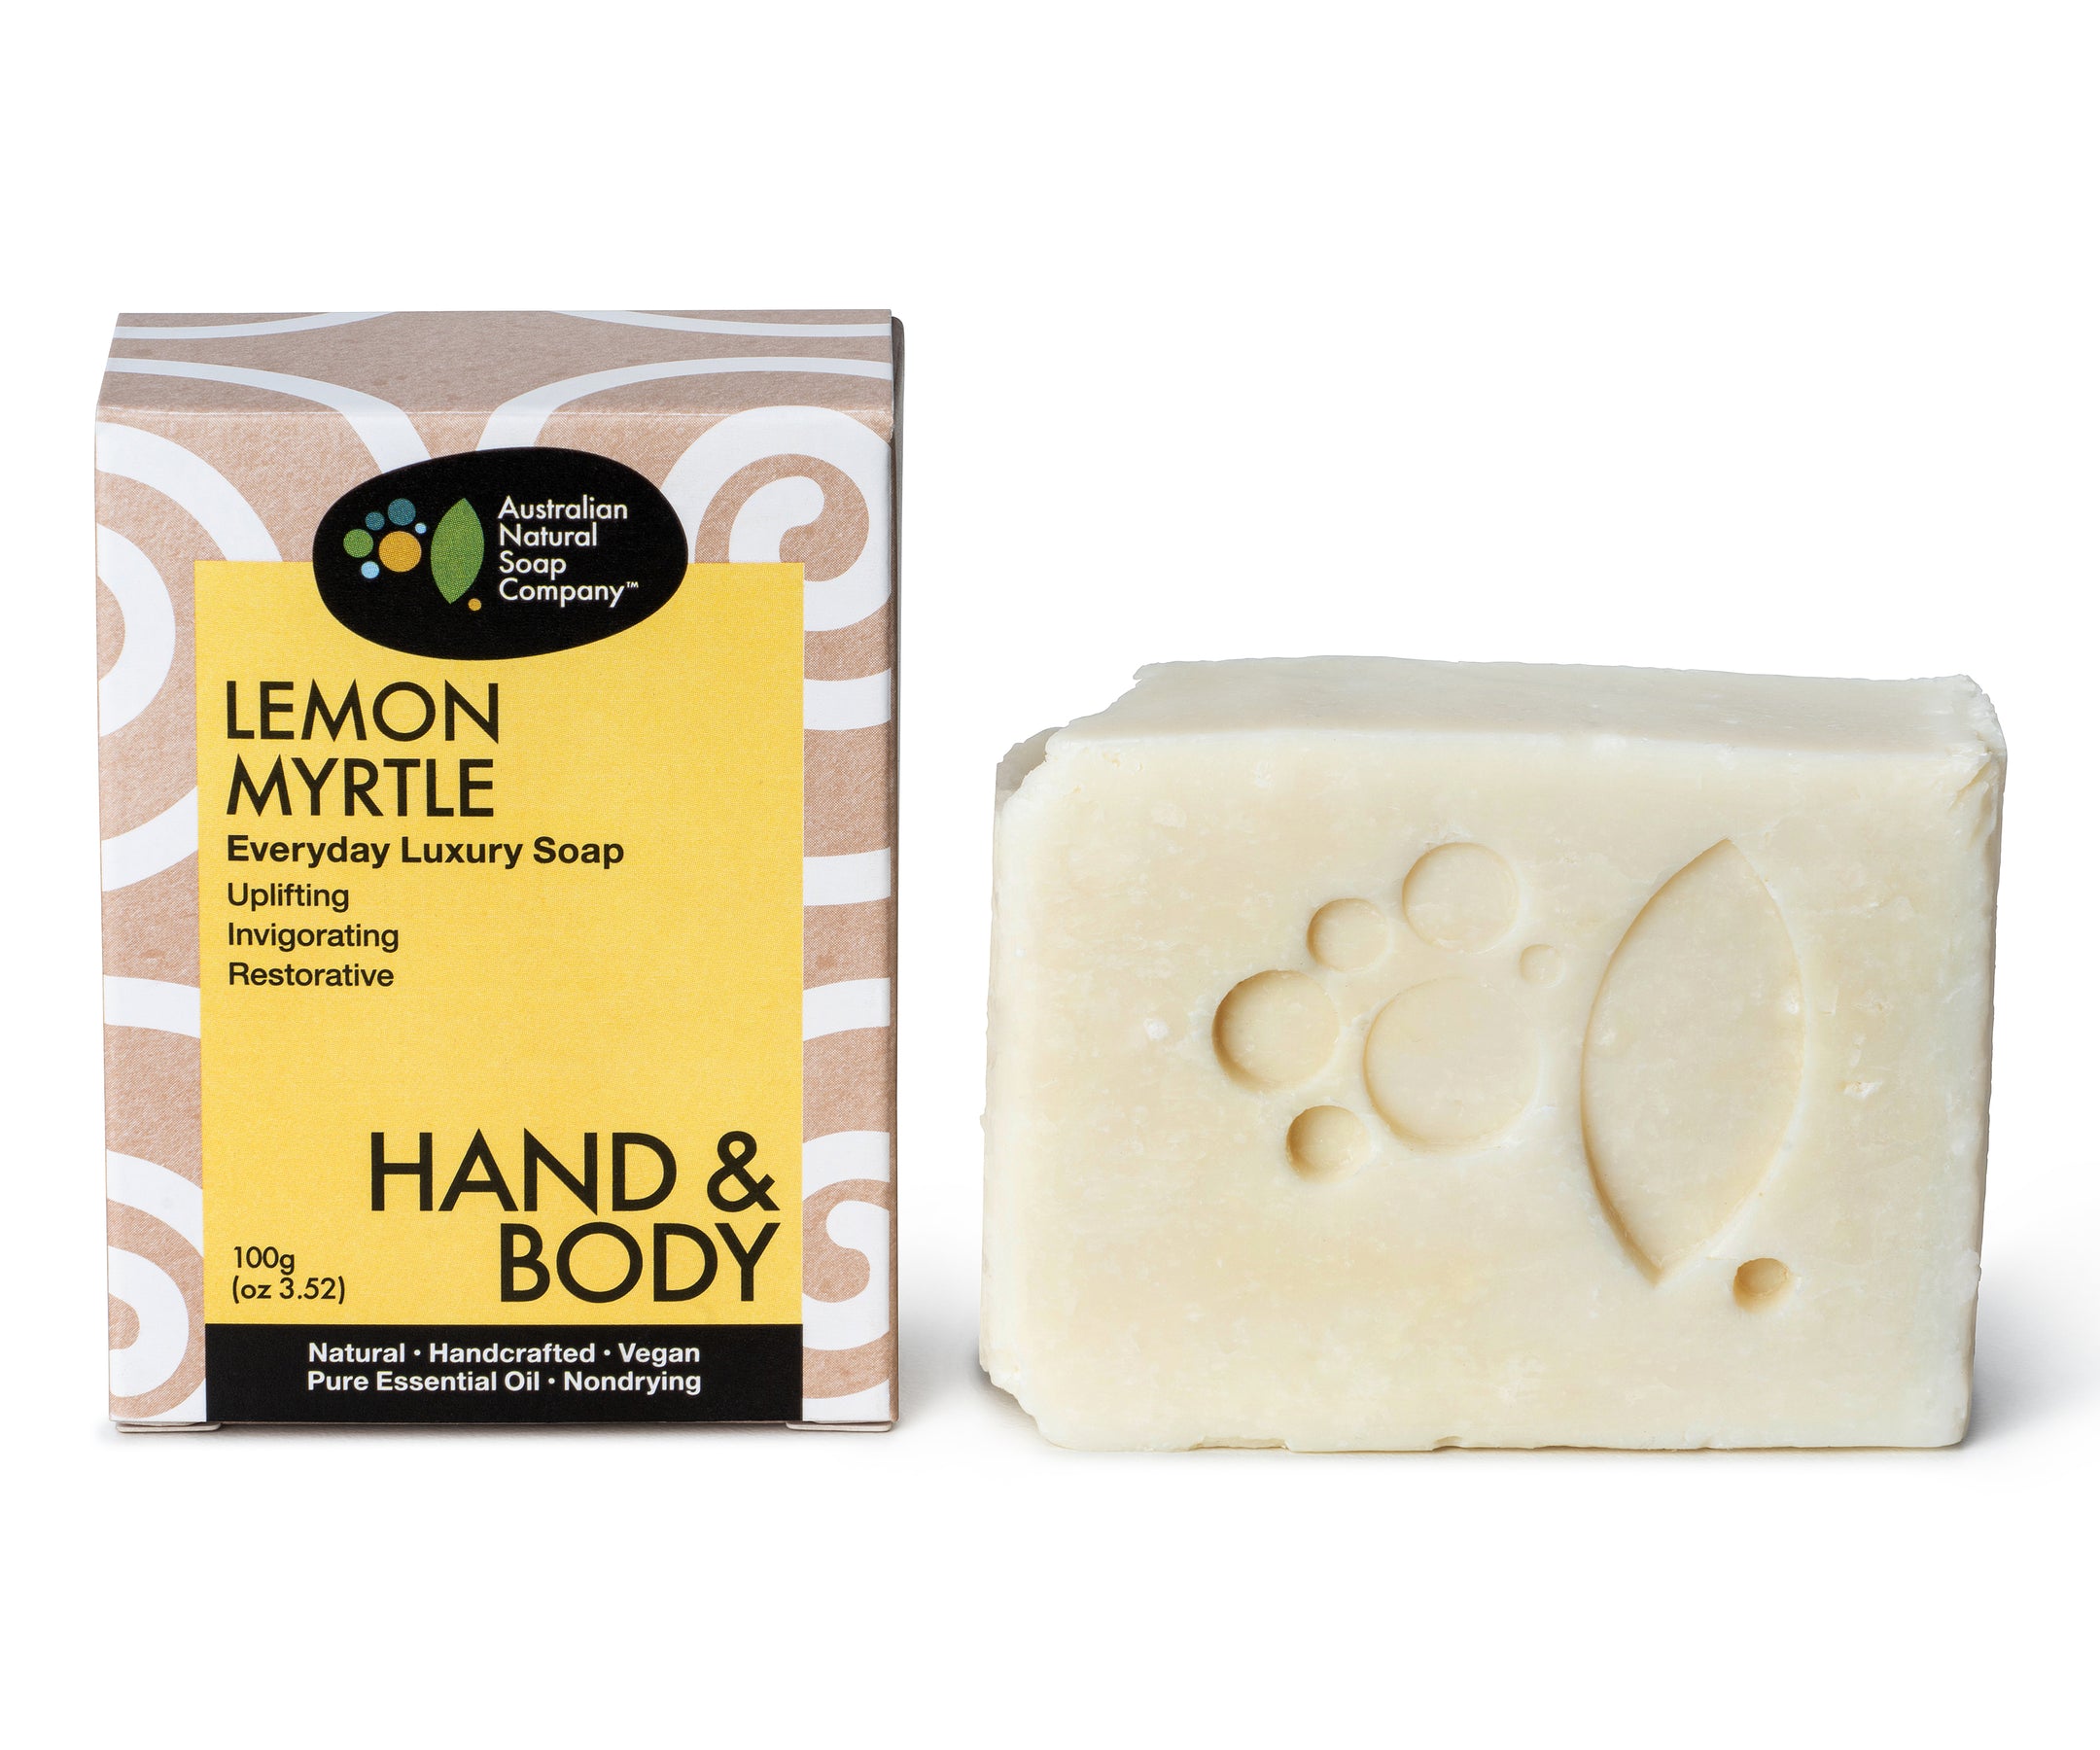 Australian Natural Soap Company handcrafted lemon myrtle hand body bar box with bar